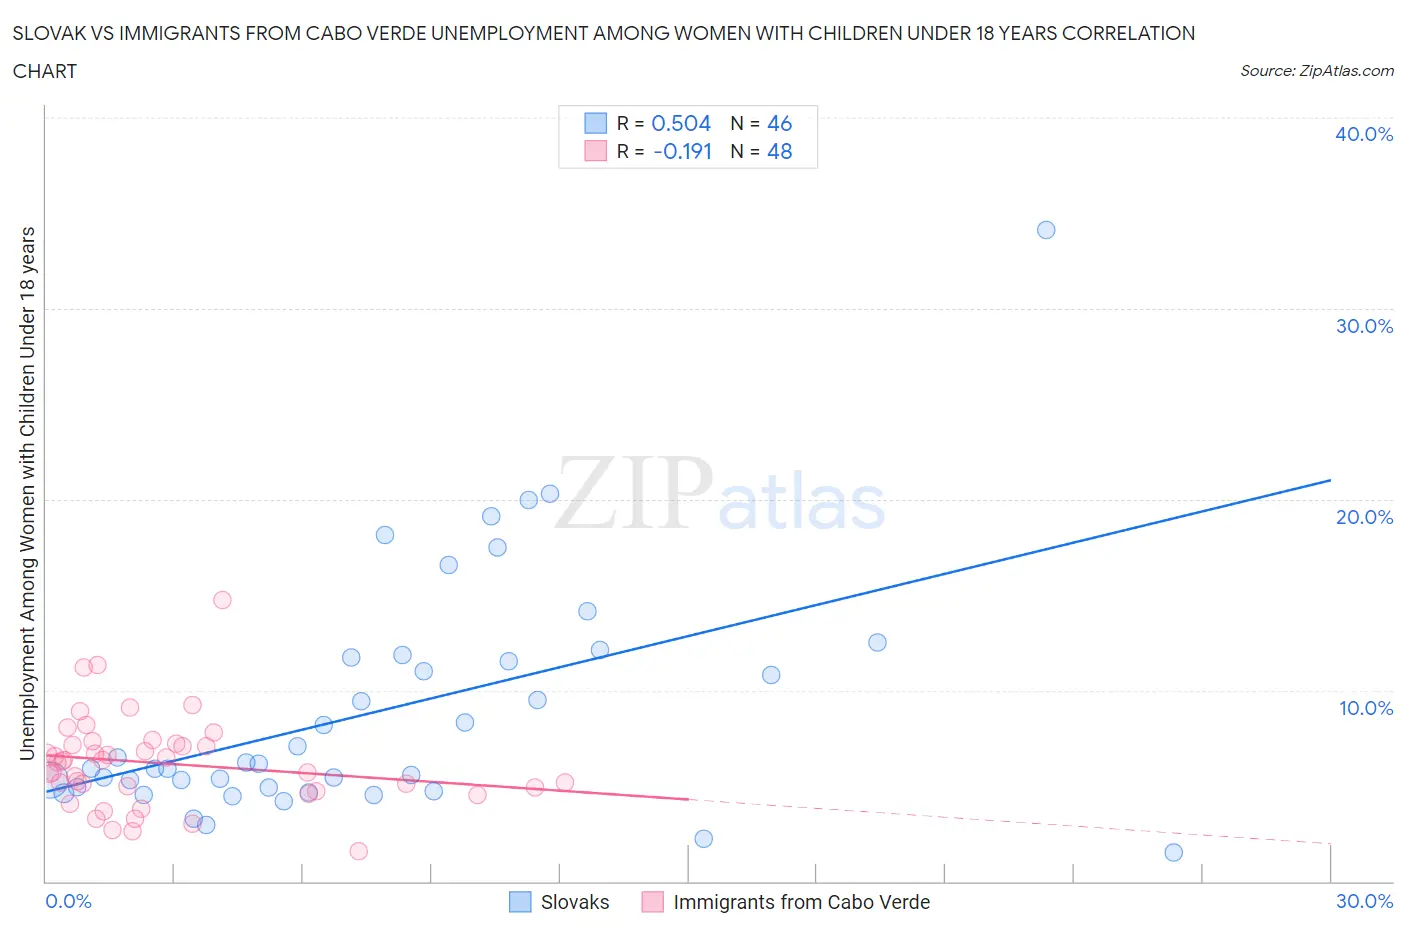 Slovak vs Immigrants from Cabo Verde Unemployment Among Women with Children Under 18 years